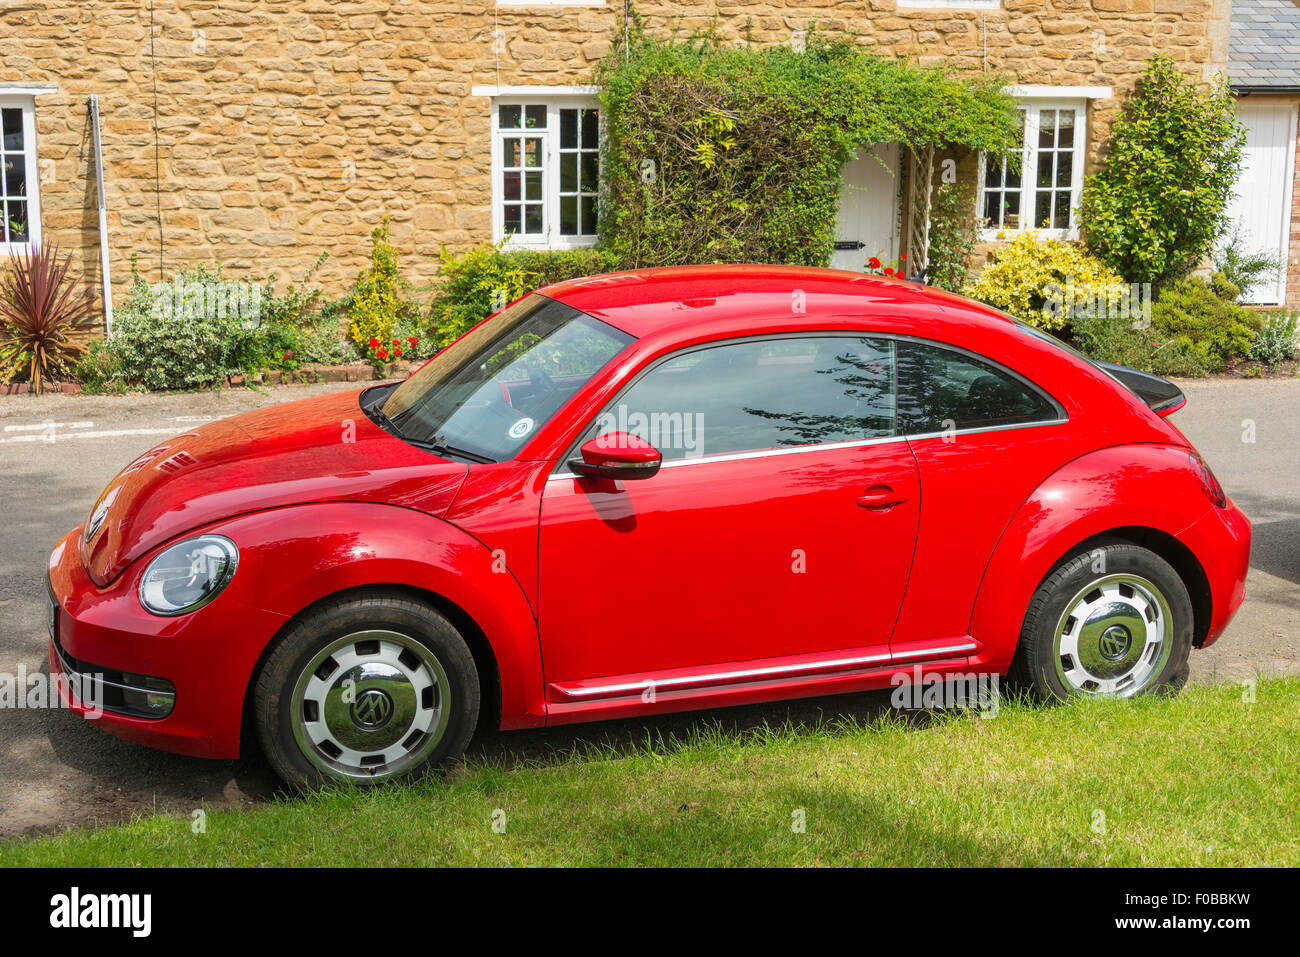 Volkswagen Coccinelle rouge, Main Street, Ashby St grands livres, Northamptonshire, Angleterre, Royaume-Uni Banque D'Images